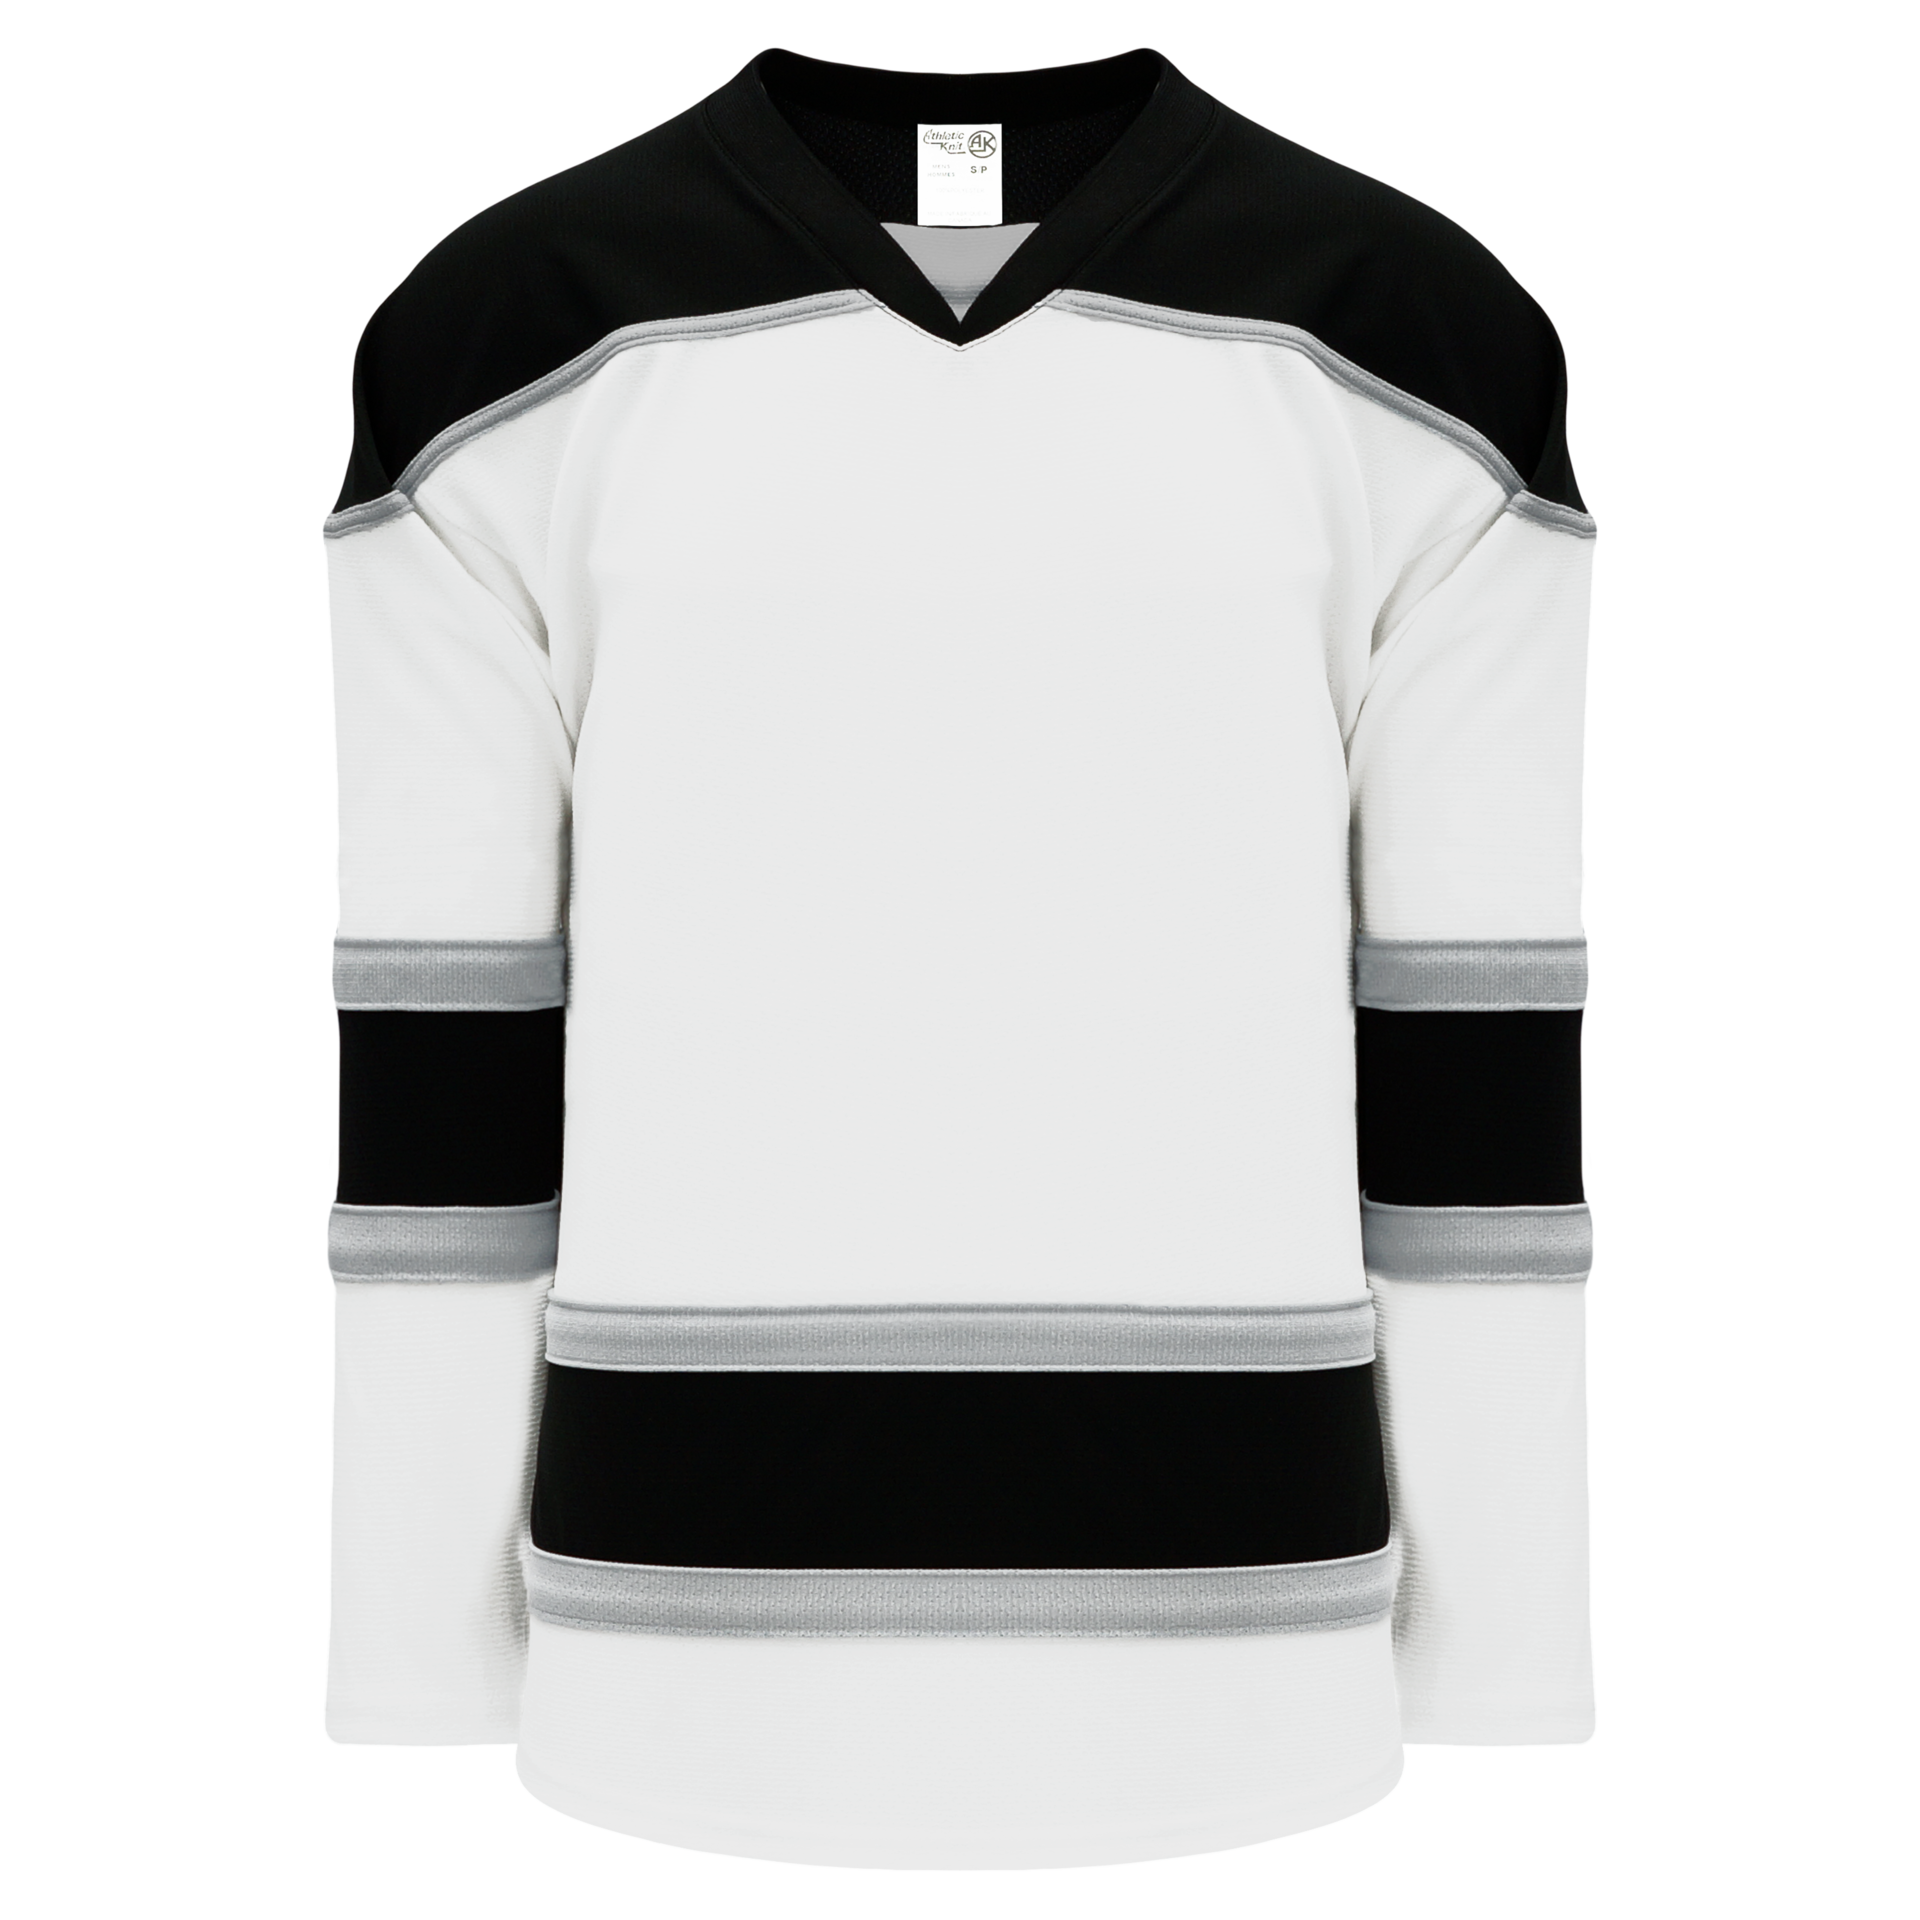 Athletic Knit (AK) H6400A-221 adult Black/White League Hockey Jersey Small